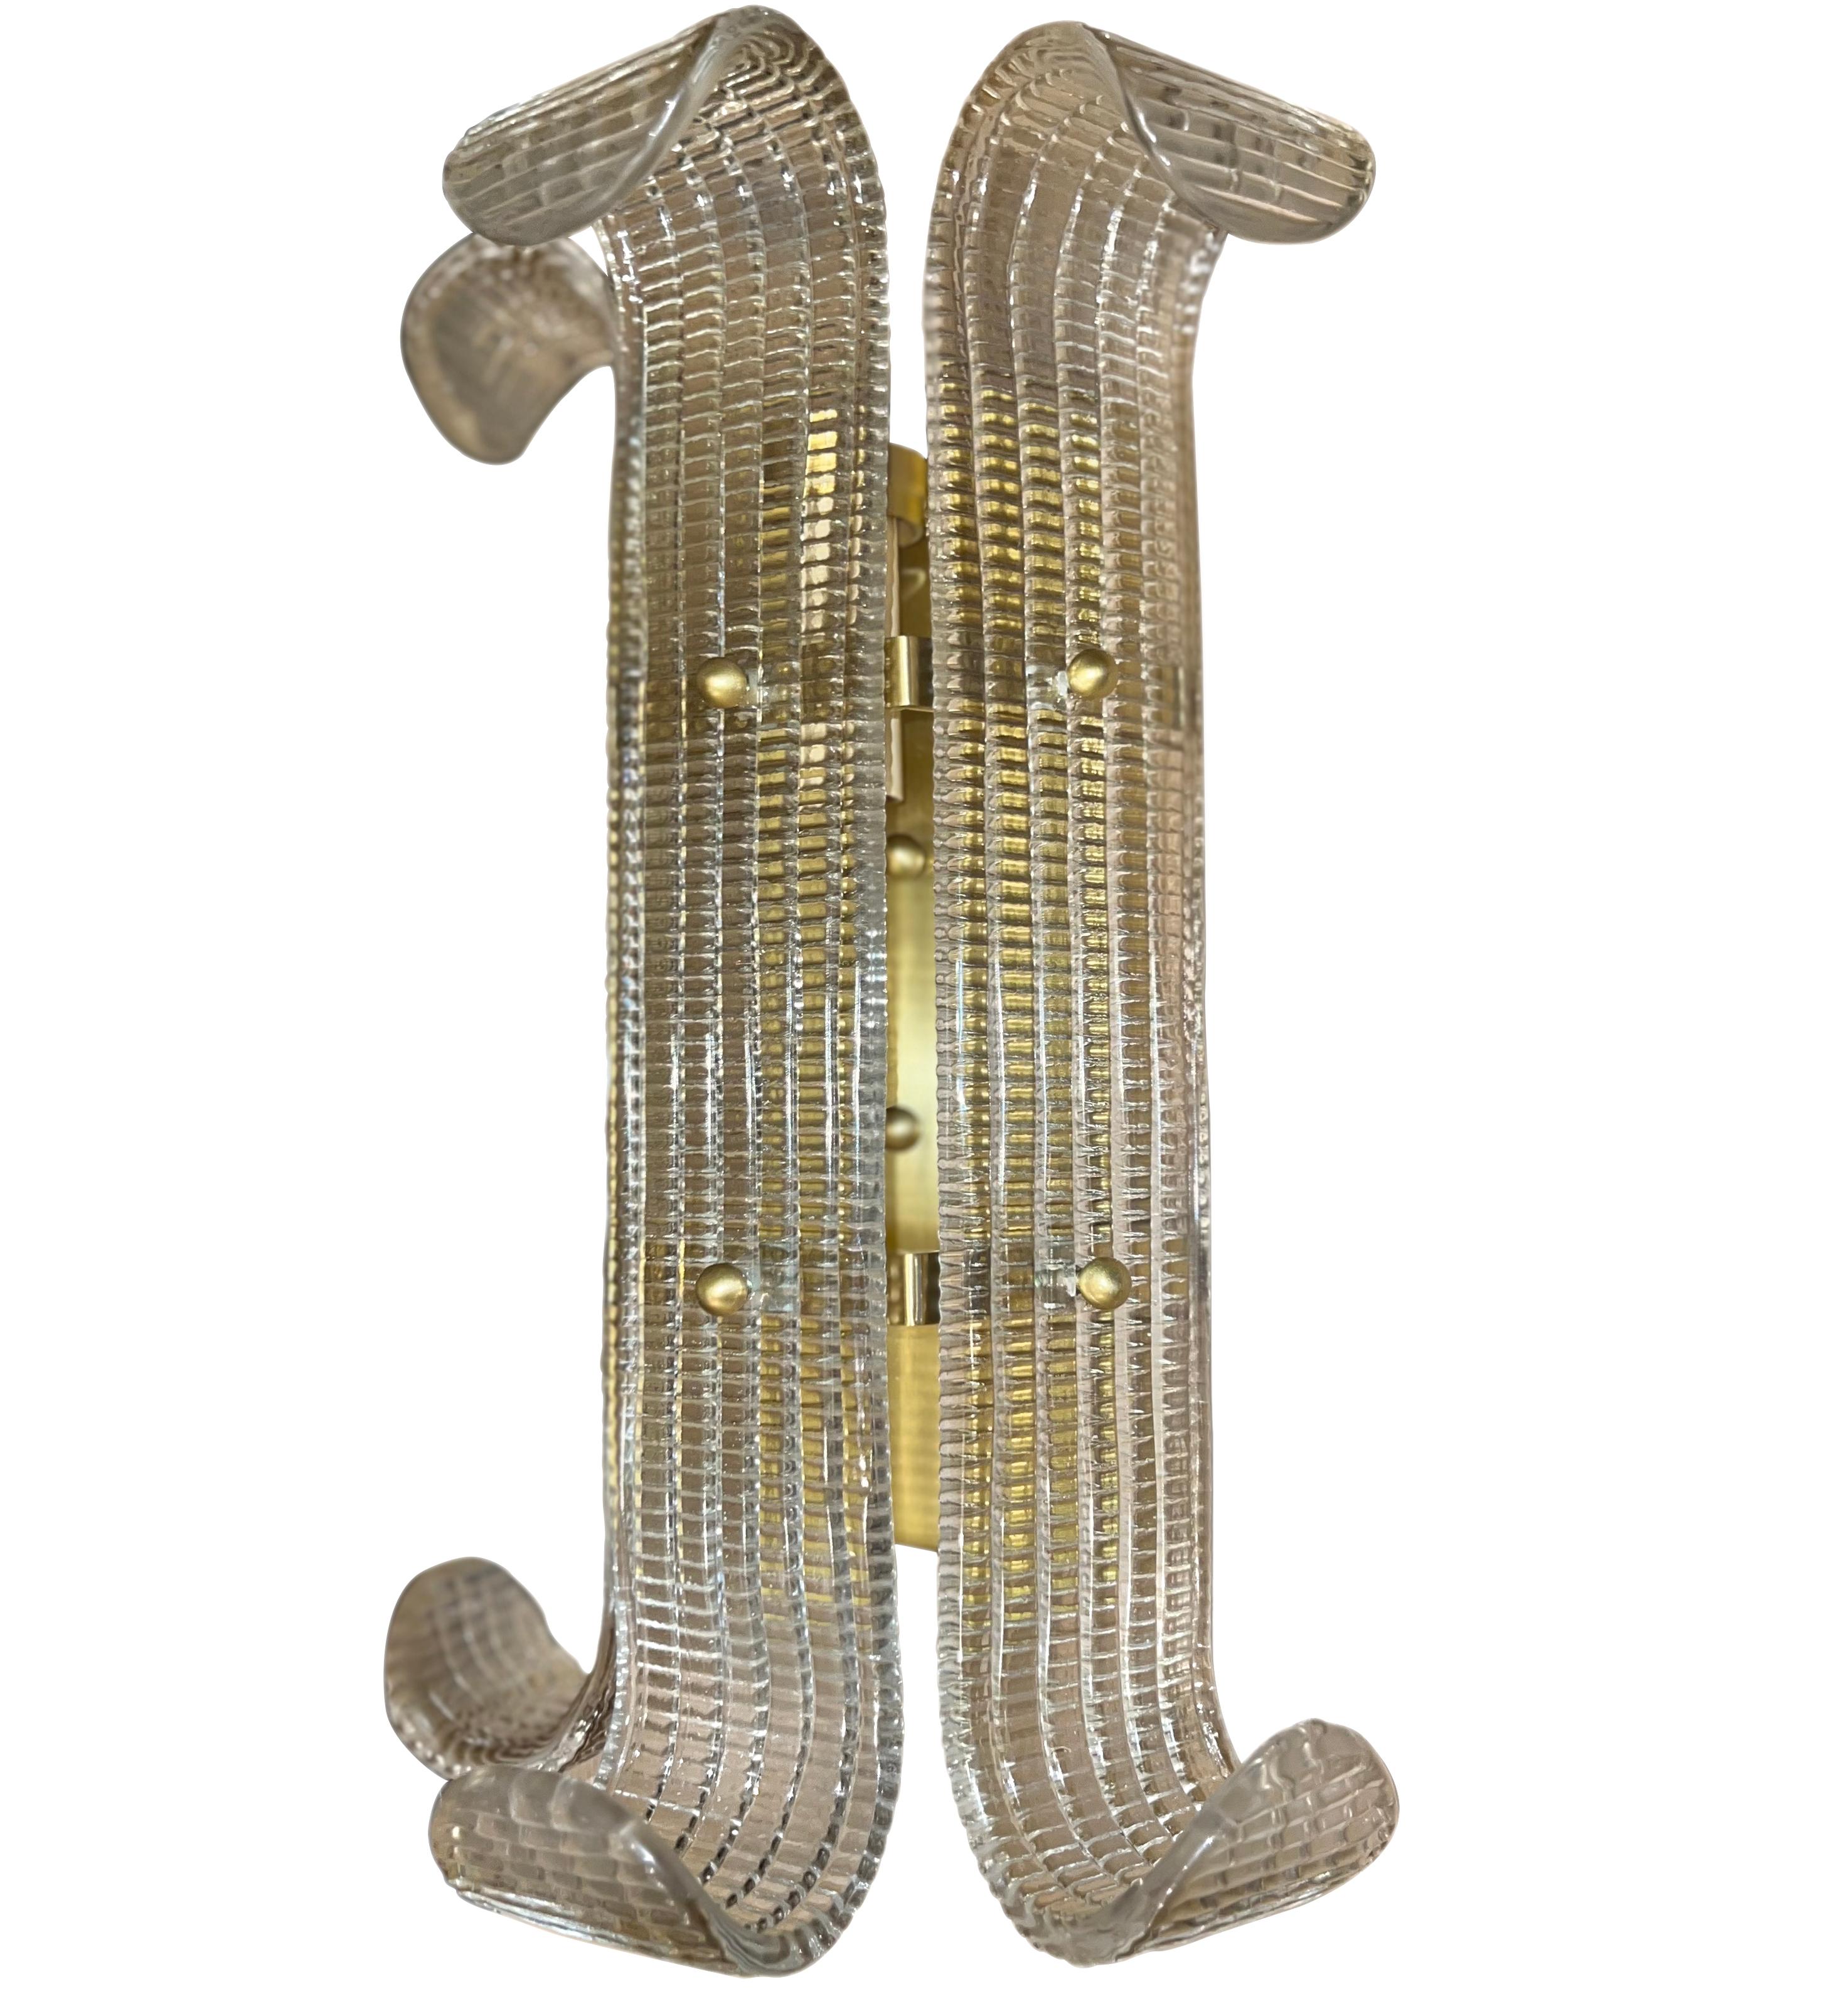 A set of four Italian circa 1960's molded glass sconces with interior lights. Sold in pairs.

Measurements:
Height: 15.5